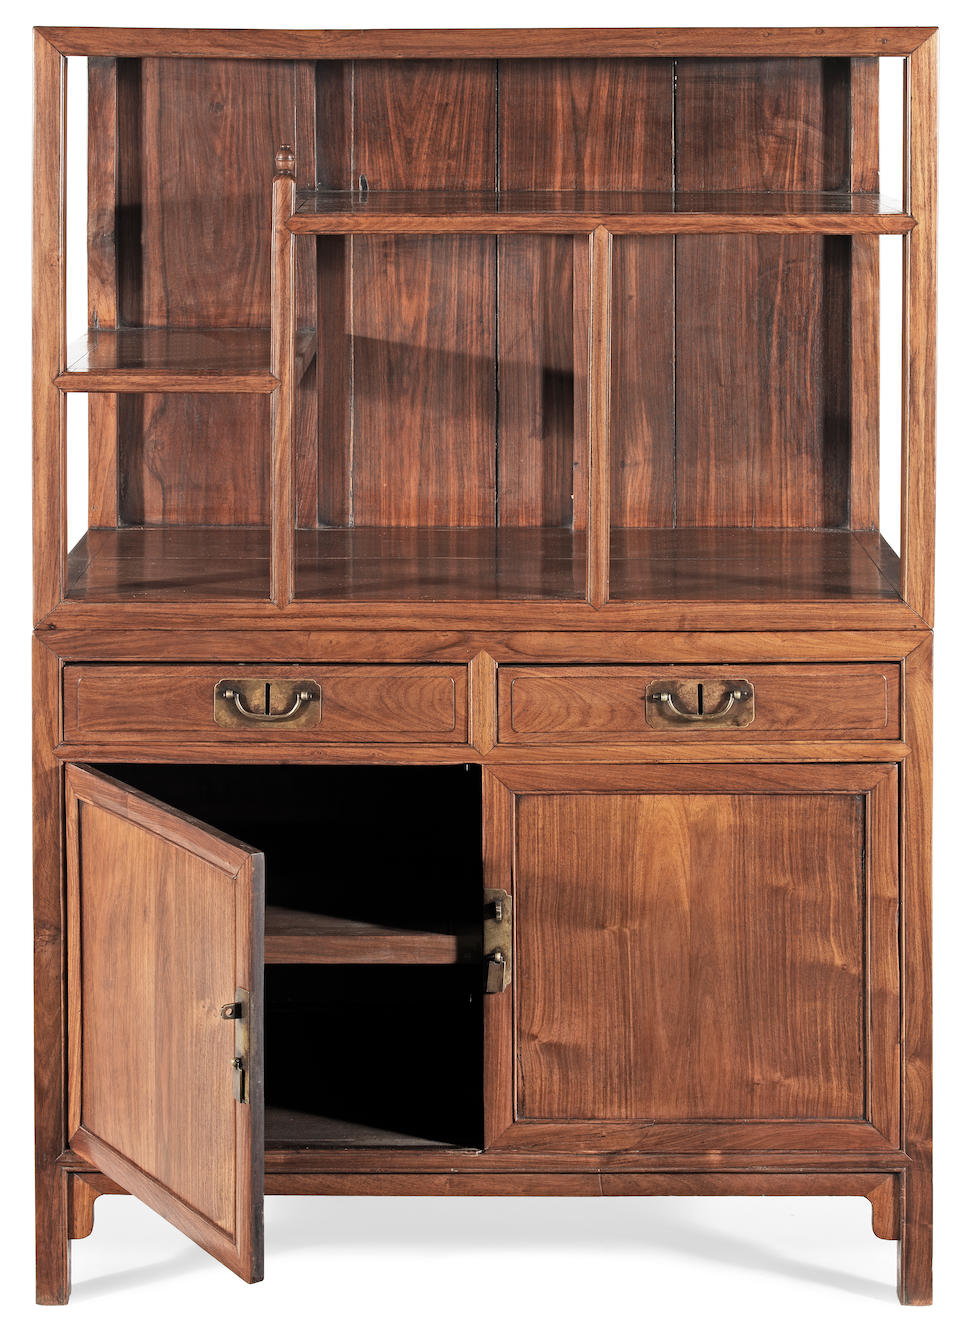 A huanghuali display cabinet Late Qing Dynasty/Republic period